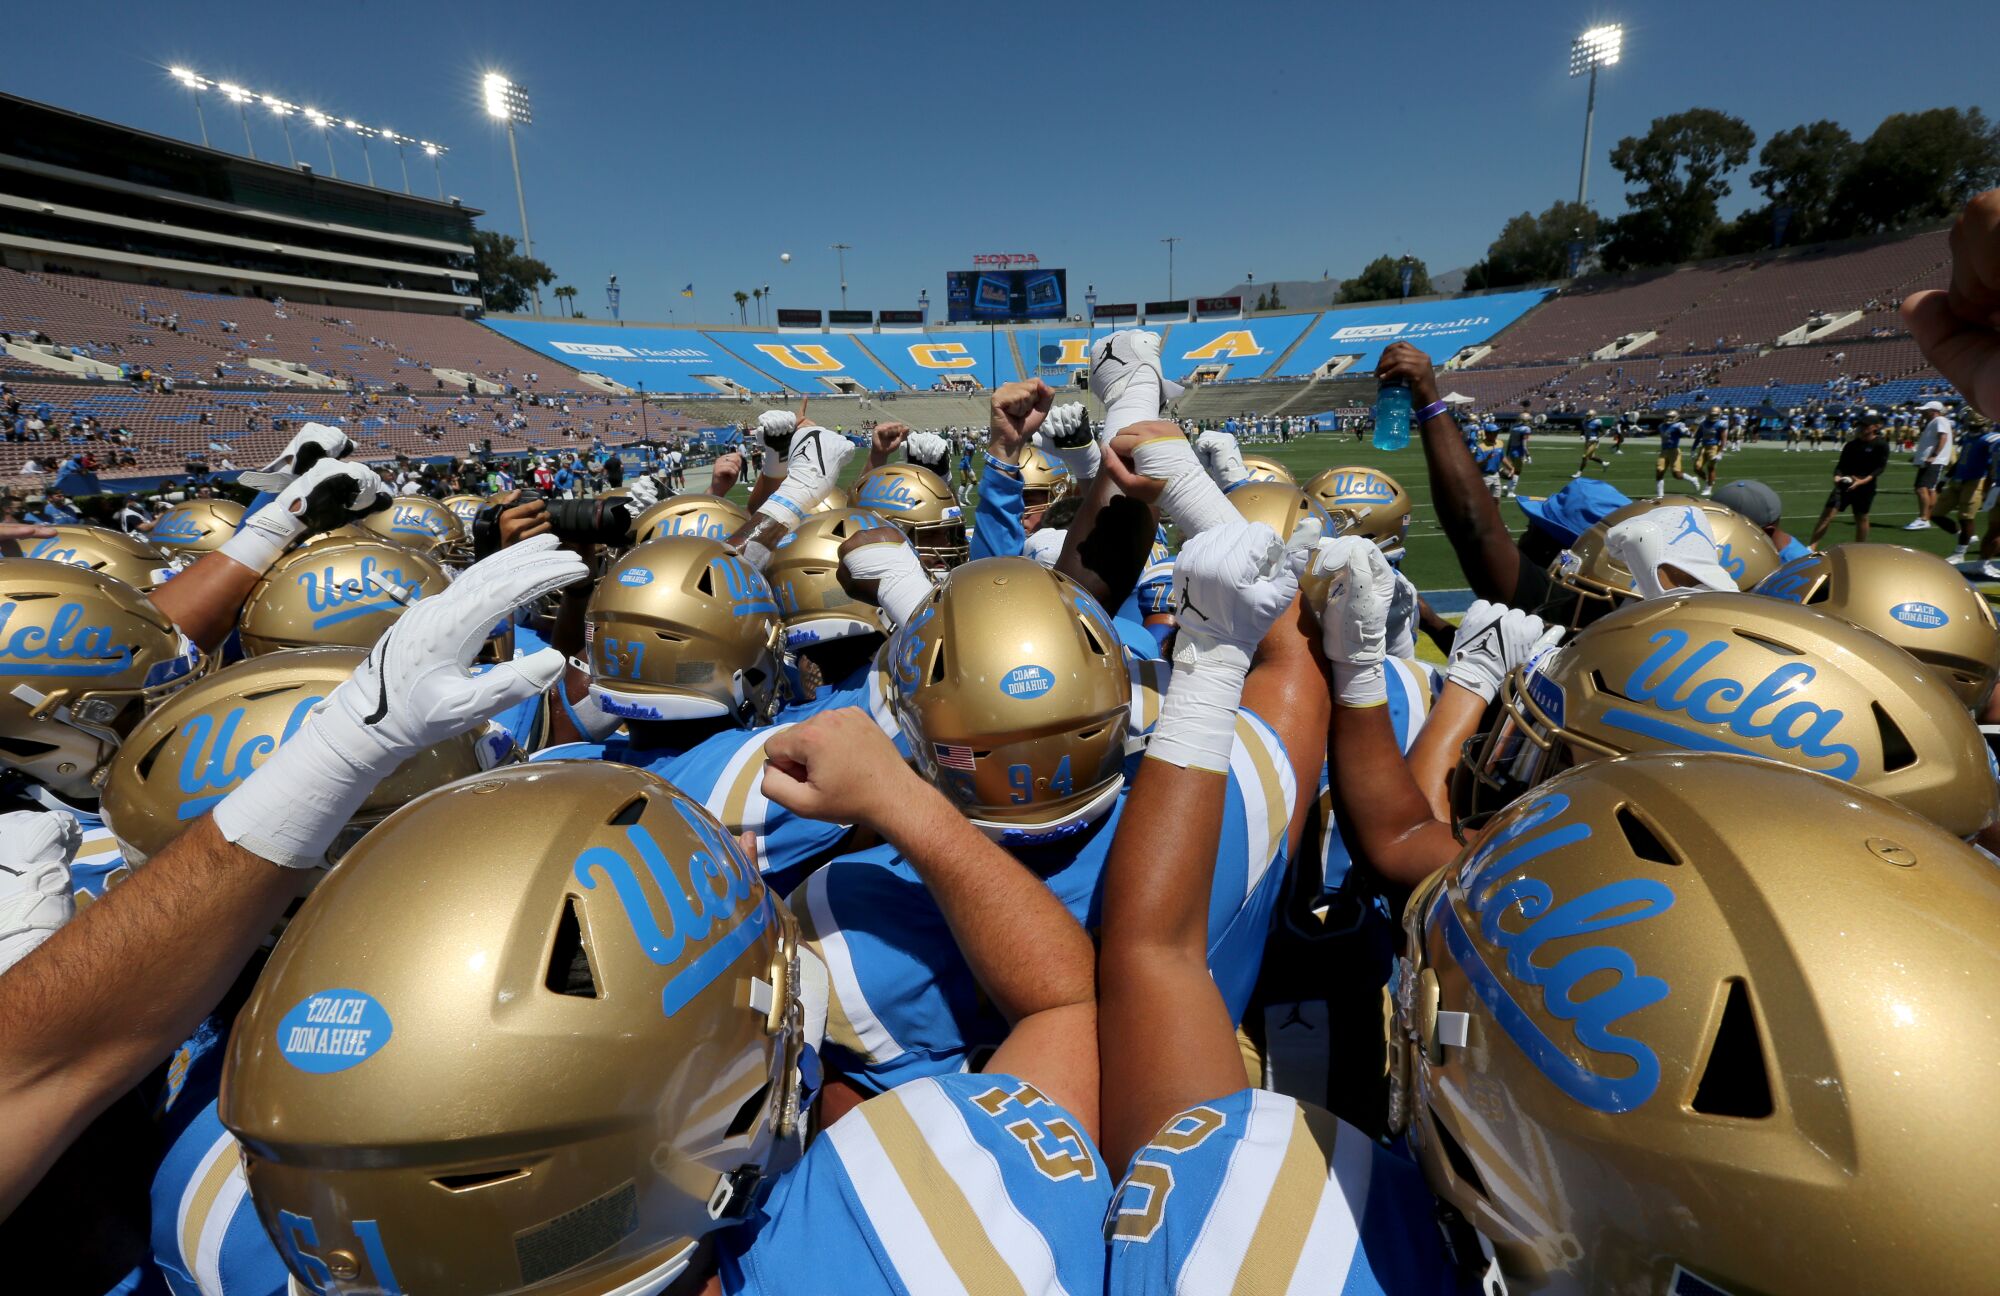 UCLA players huddle before playing Hawaii at the Rose Bowl.